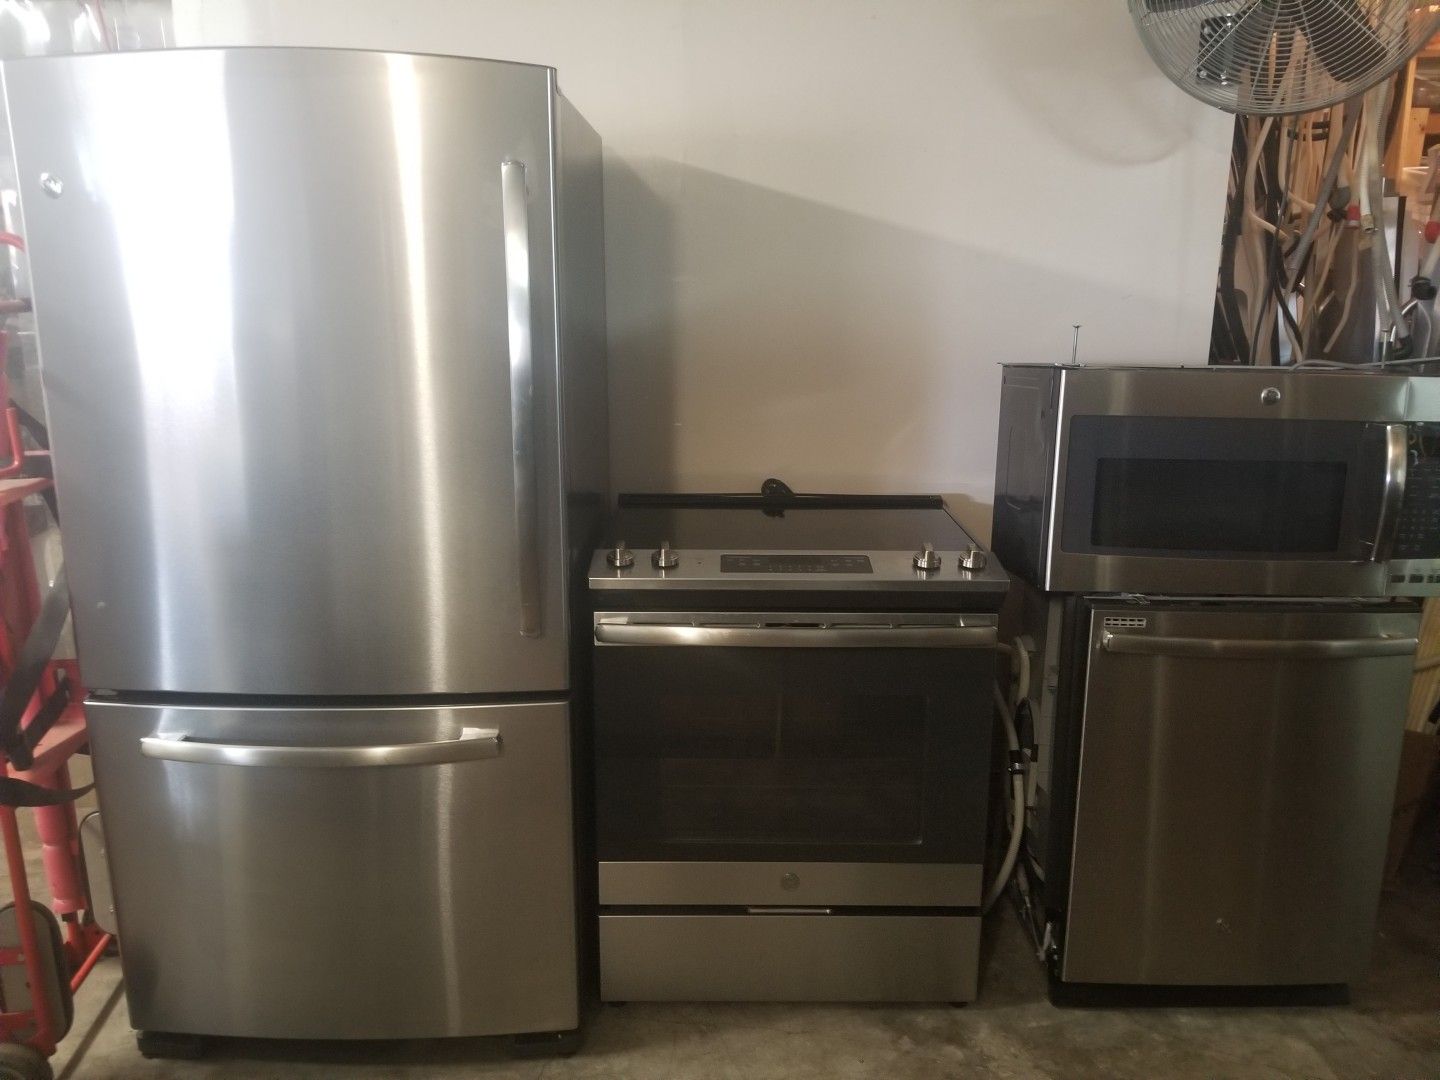 GE stainless steel appliances